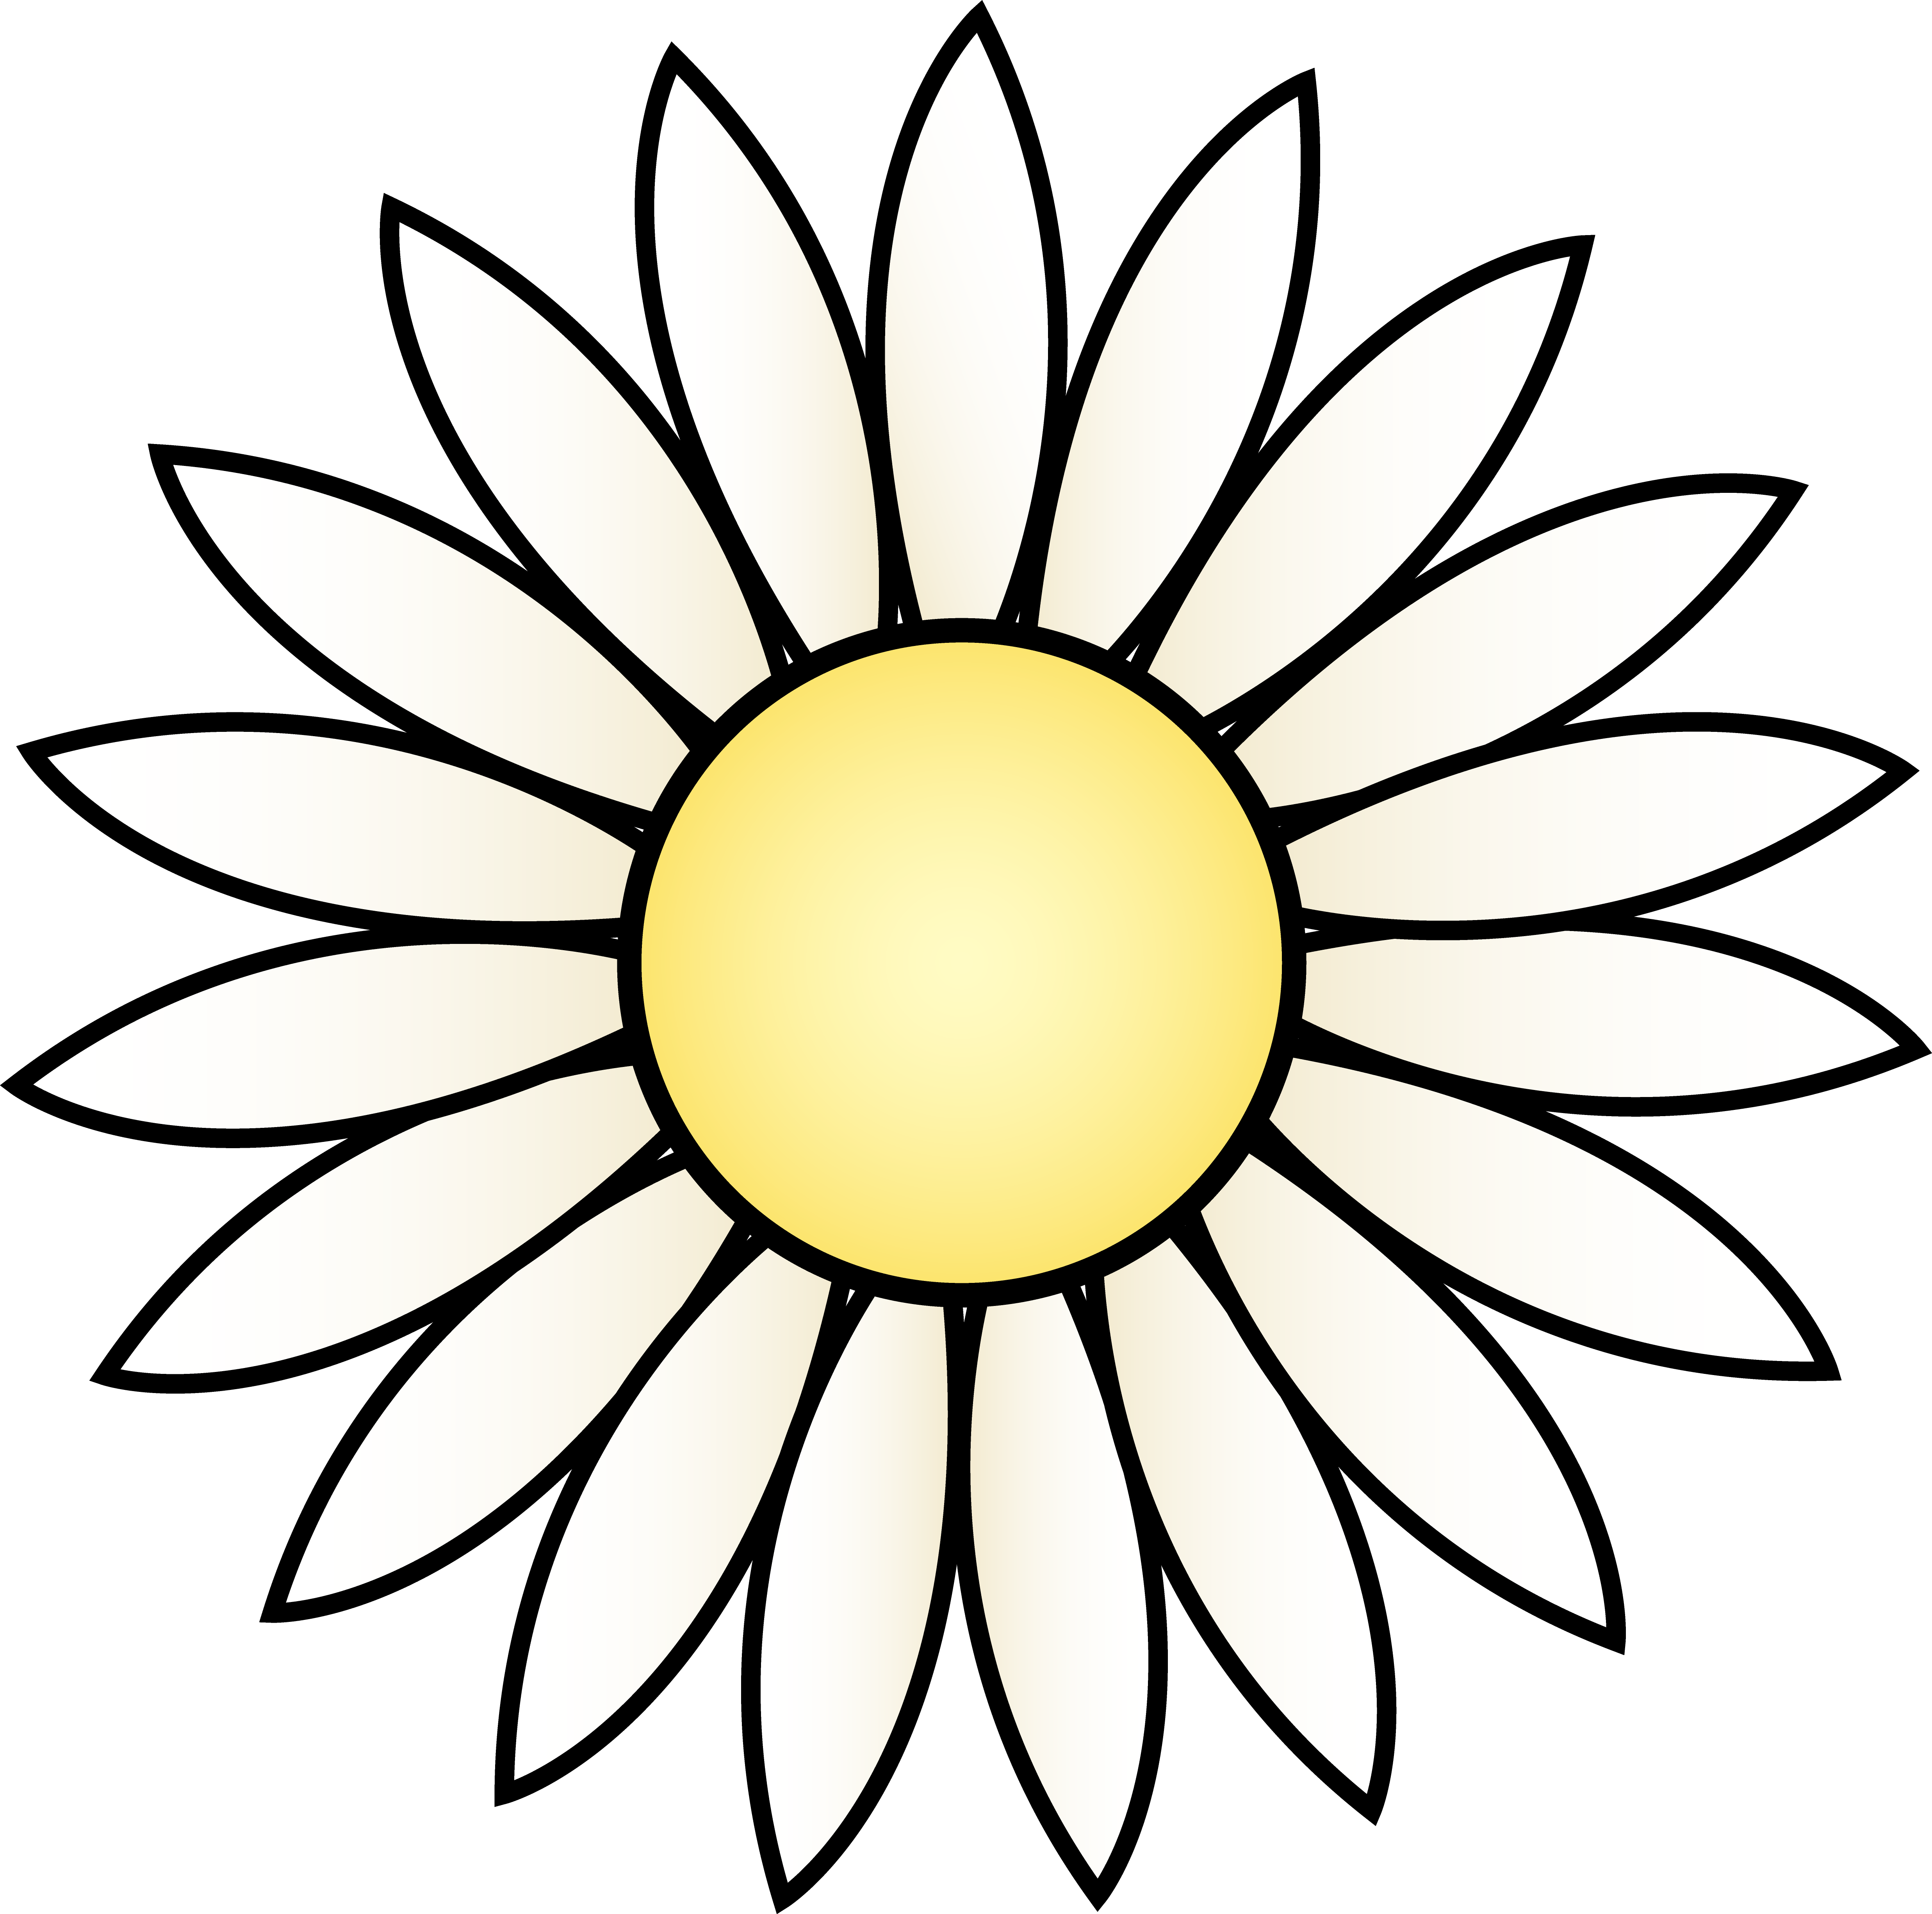 Cute Cartoon Daisy Flower Images & Pictures - Becuo